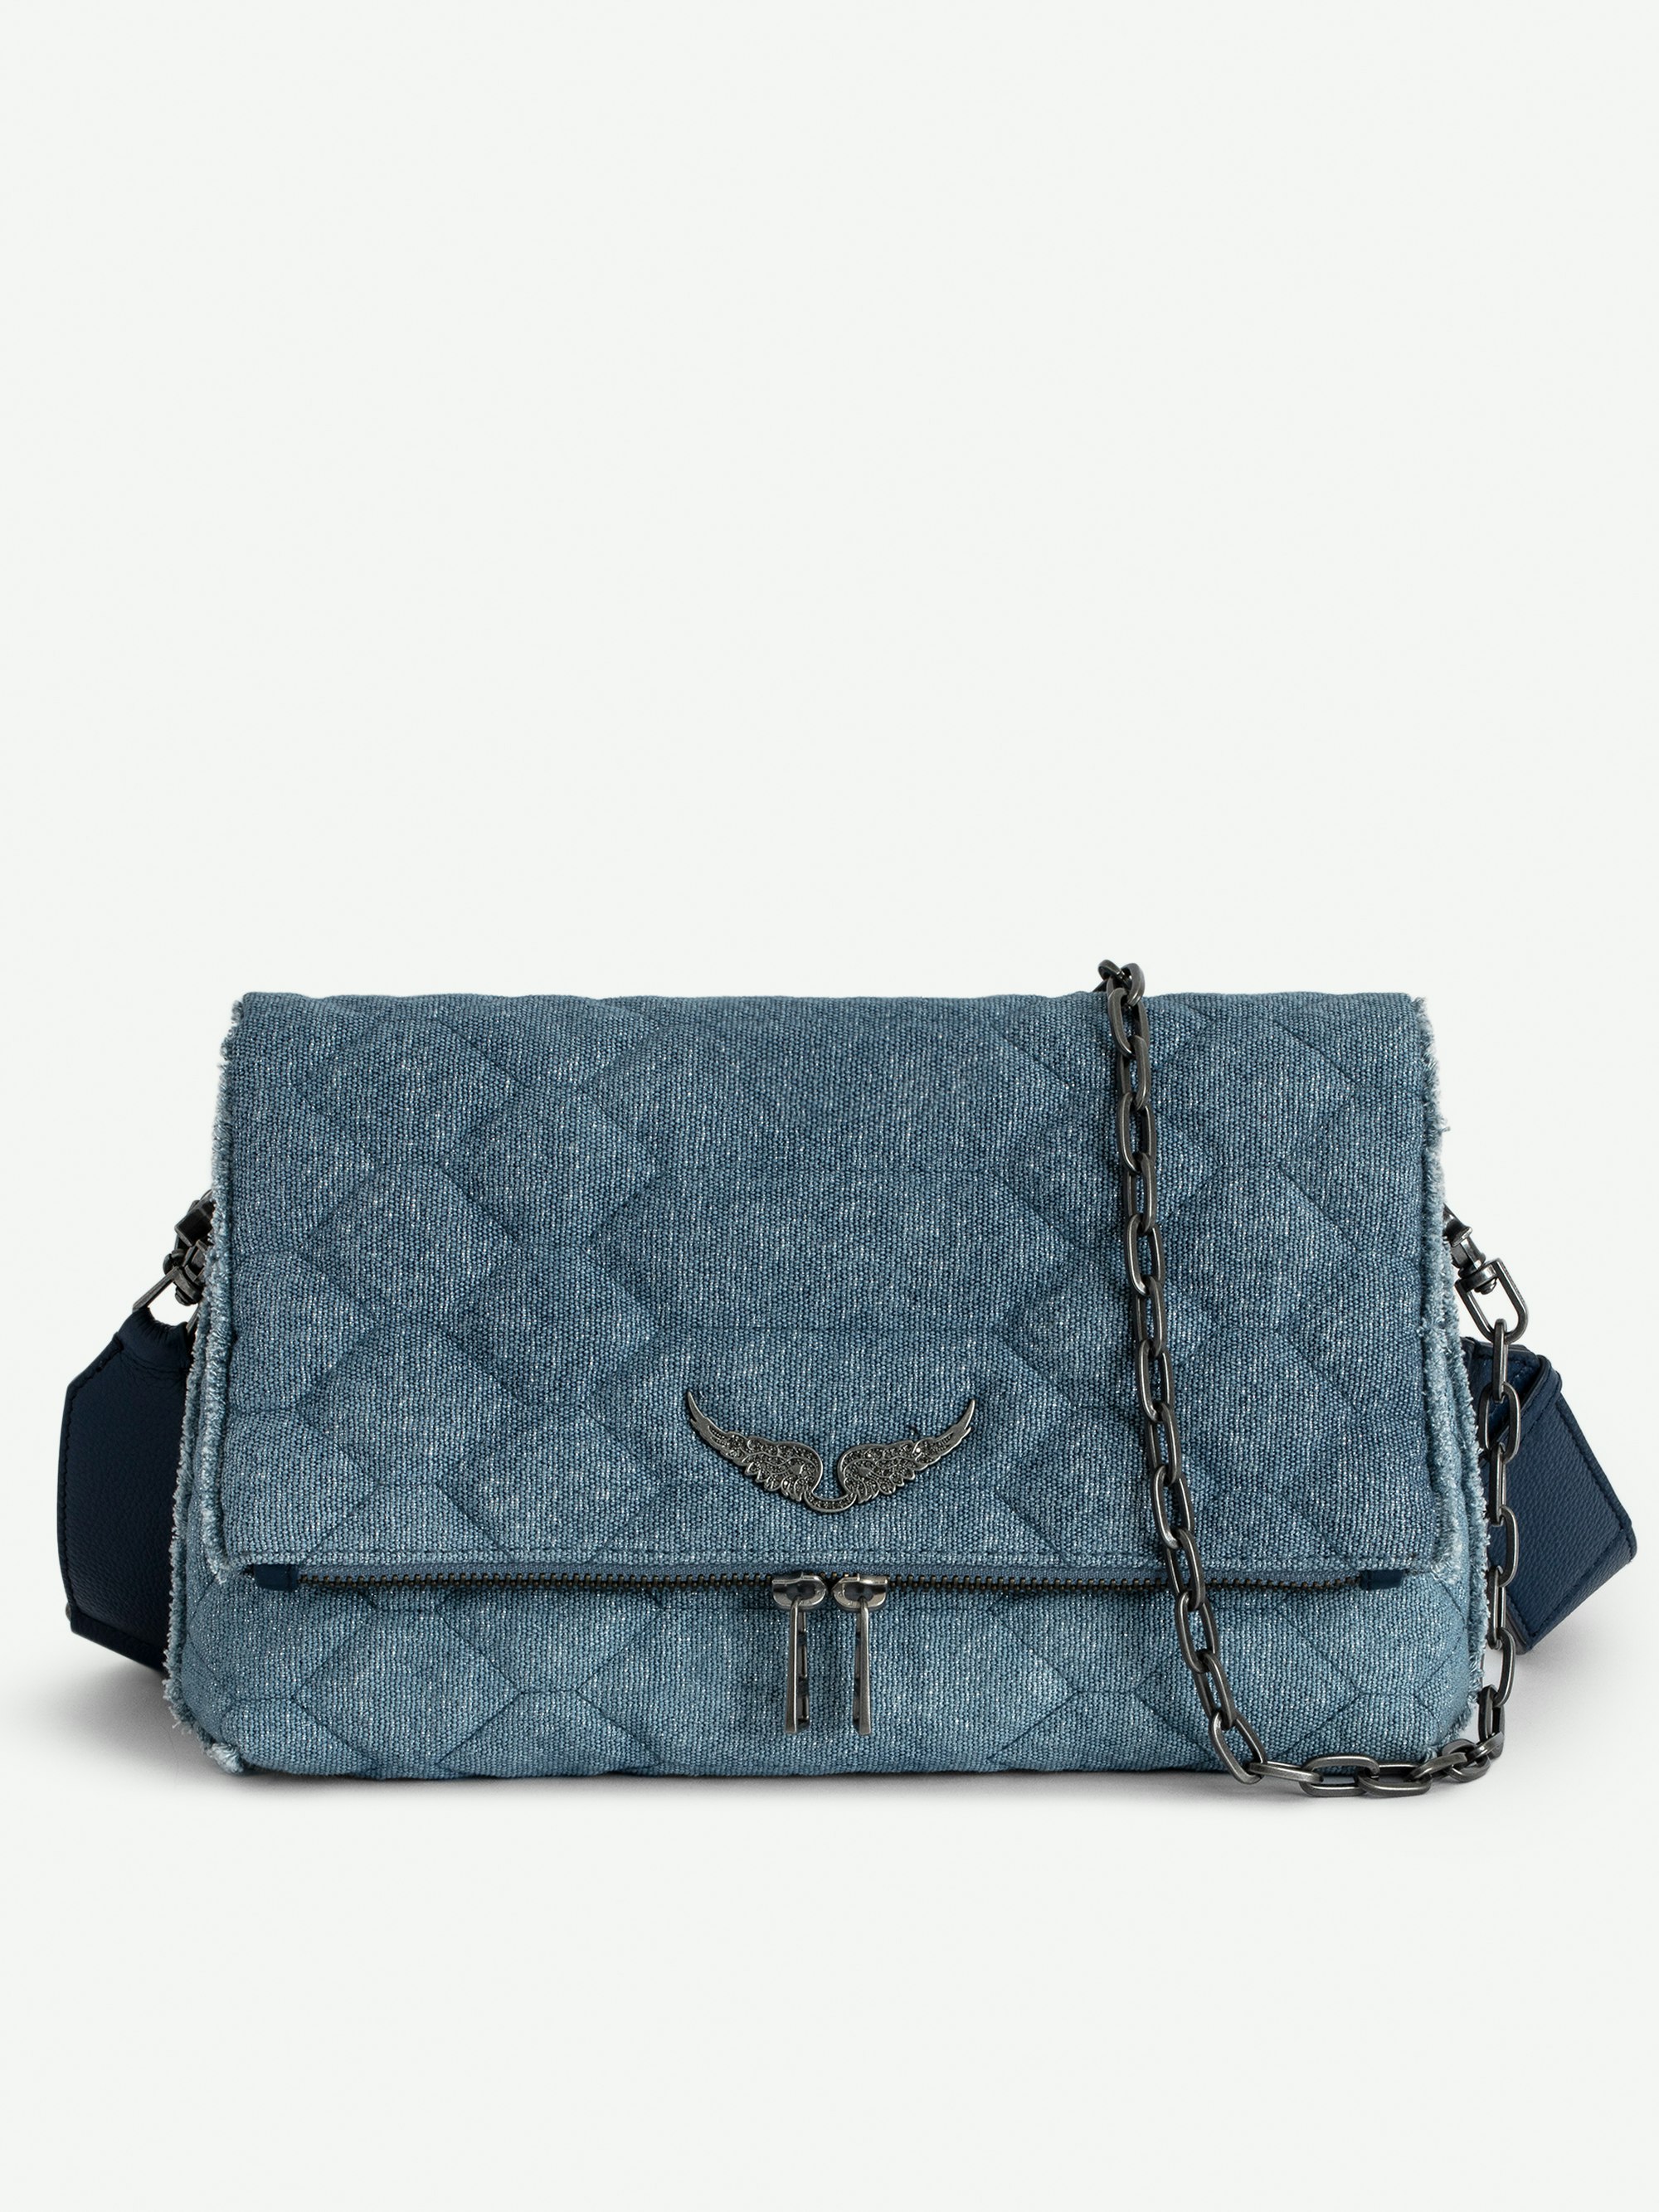 Rocky Denim Glitter Quilted Bag - Glitter quilted denim bag with shoulder strap, chain and wings.